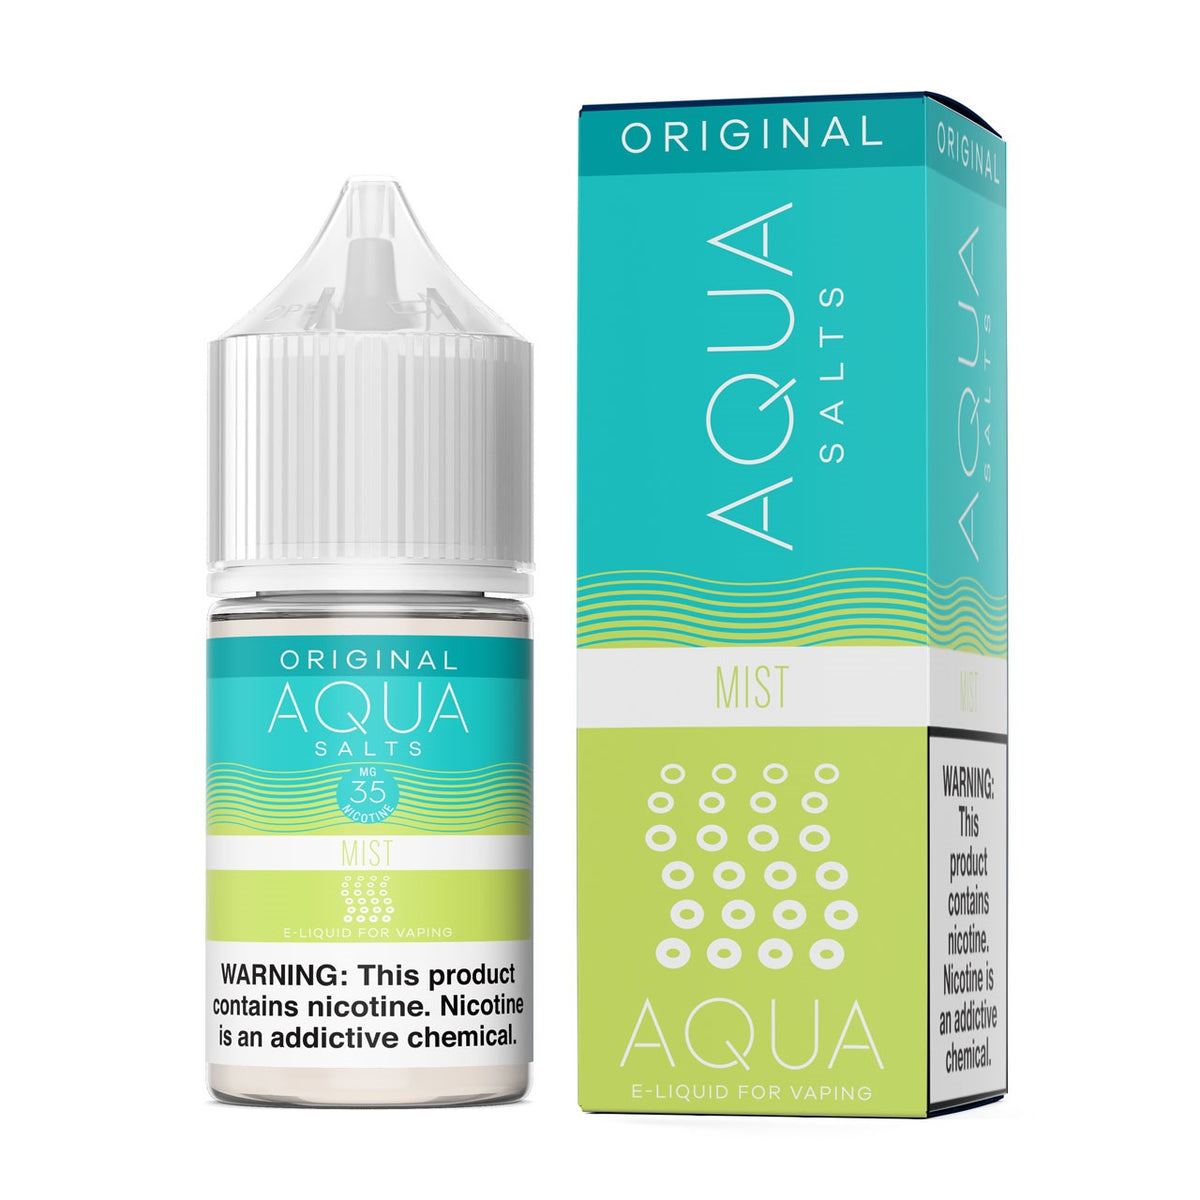 Mist by Aqua Salts Series 30mL with packaging